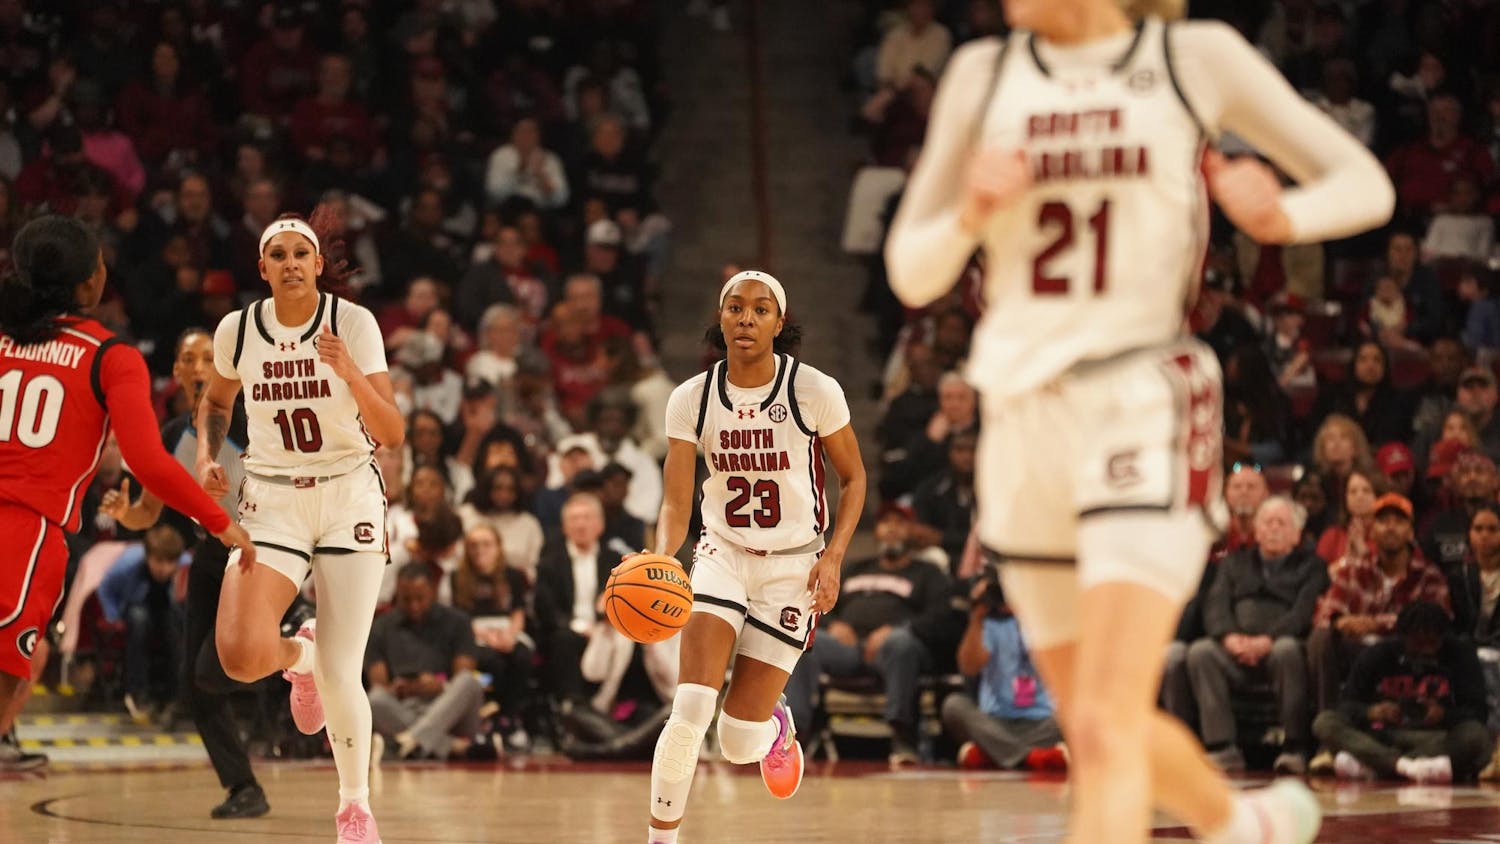 Junior guard Bree Hall dribbles the ball up the court during South Carolina's game against Georgia on Feb. 18, 2024, at Colonial Life Arena. Hall scored 9 points during the Gamecocks' 70-56 victory over the Bulldogs.